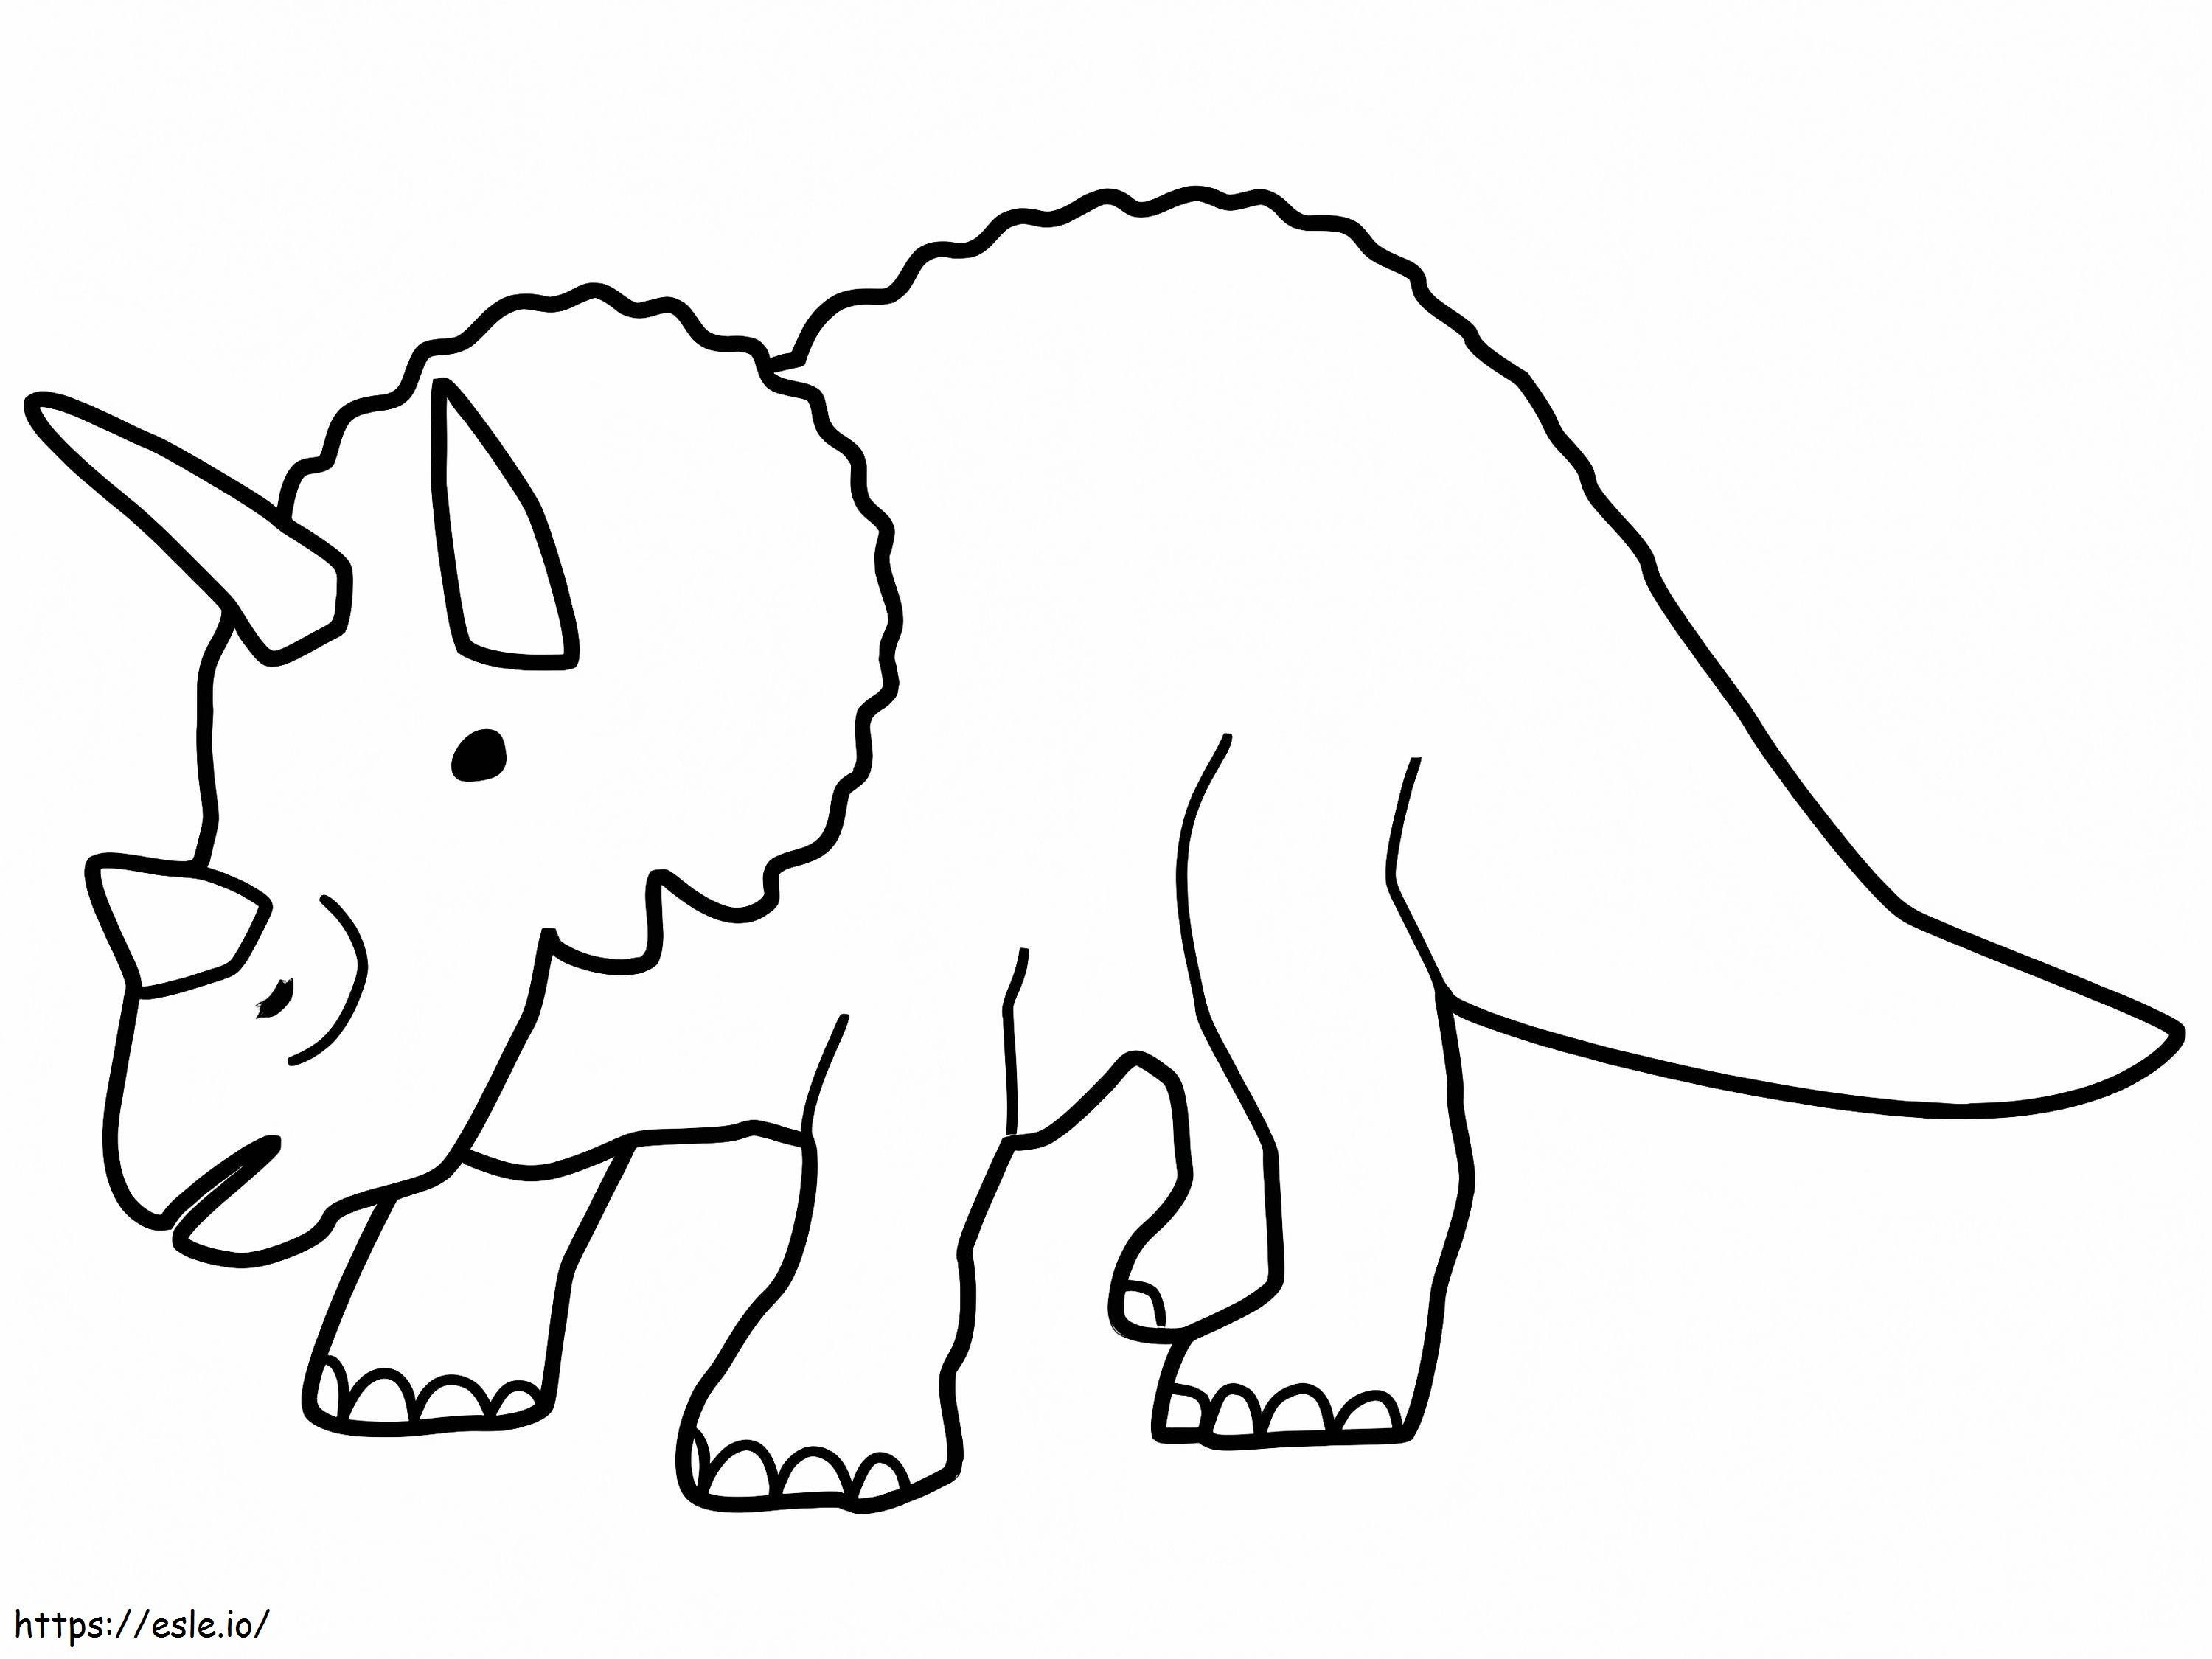 Basic Triceratops coloring page